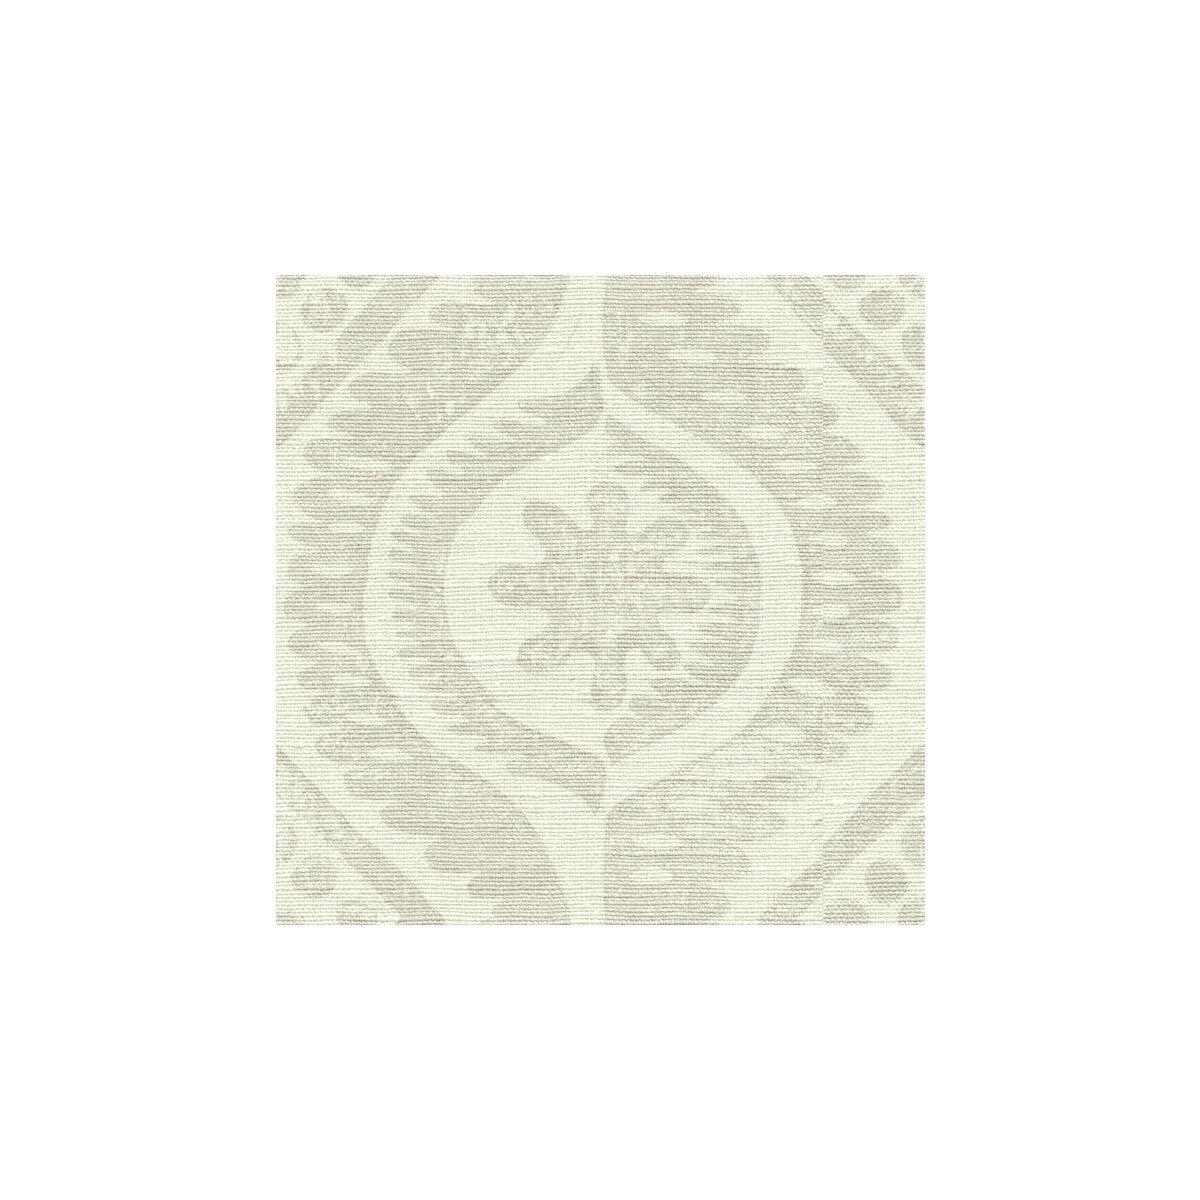 Damask fabric in taupe color - pattern BFC-3518.6.0 - by Lee Jofa in the Blithfield collection